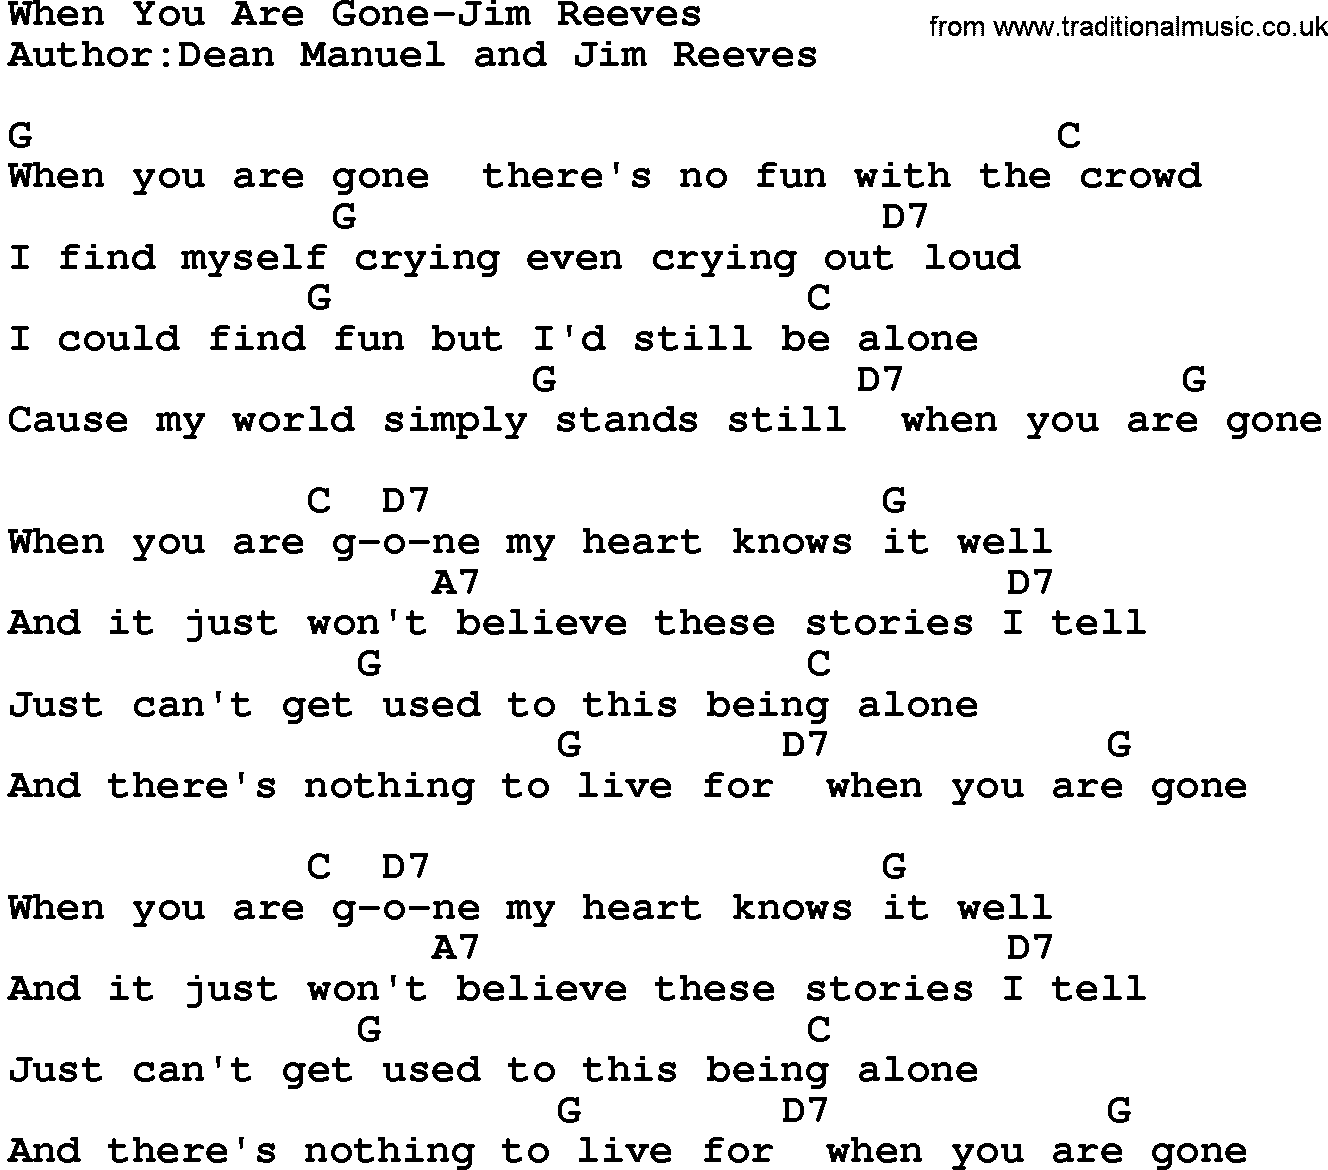 Country music song: When You Are Gone-Jim Reeves lyrics and chords